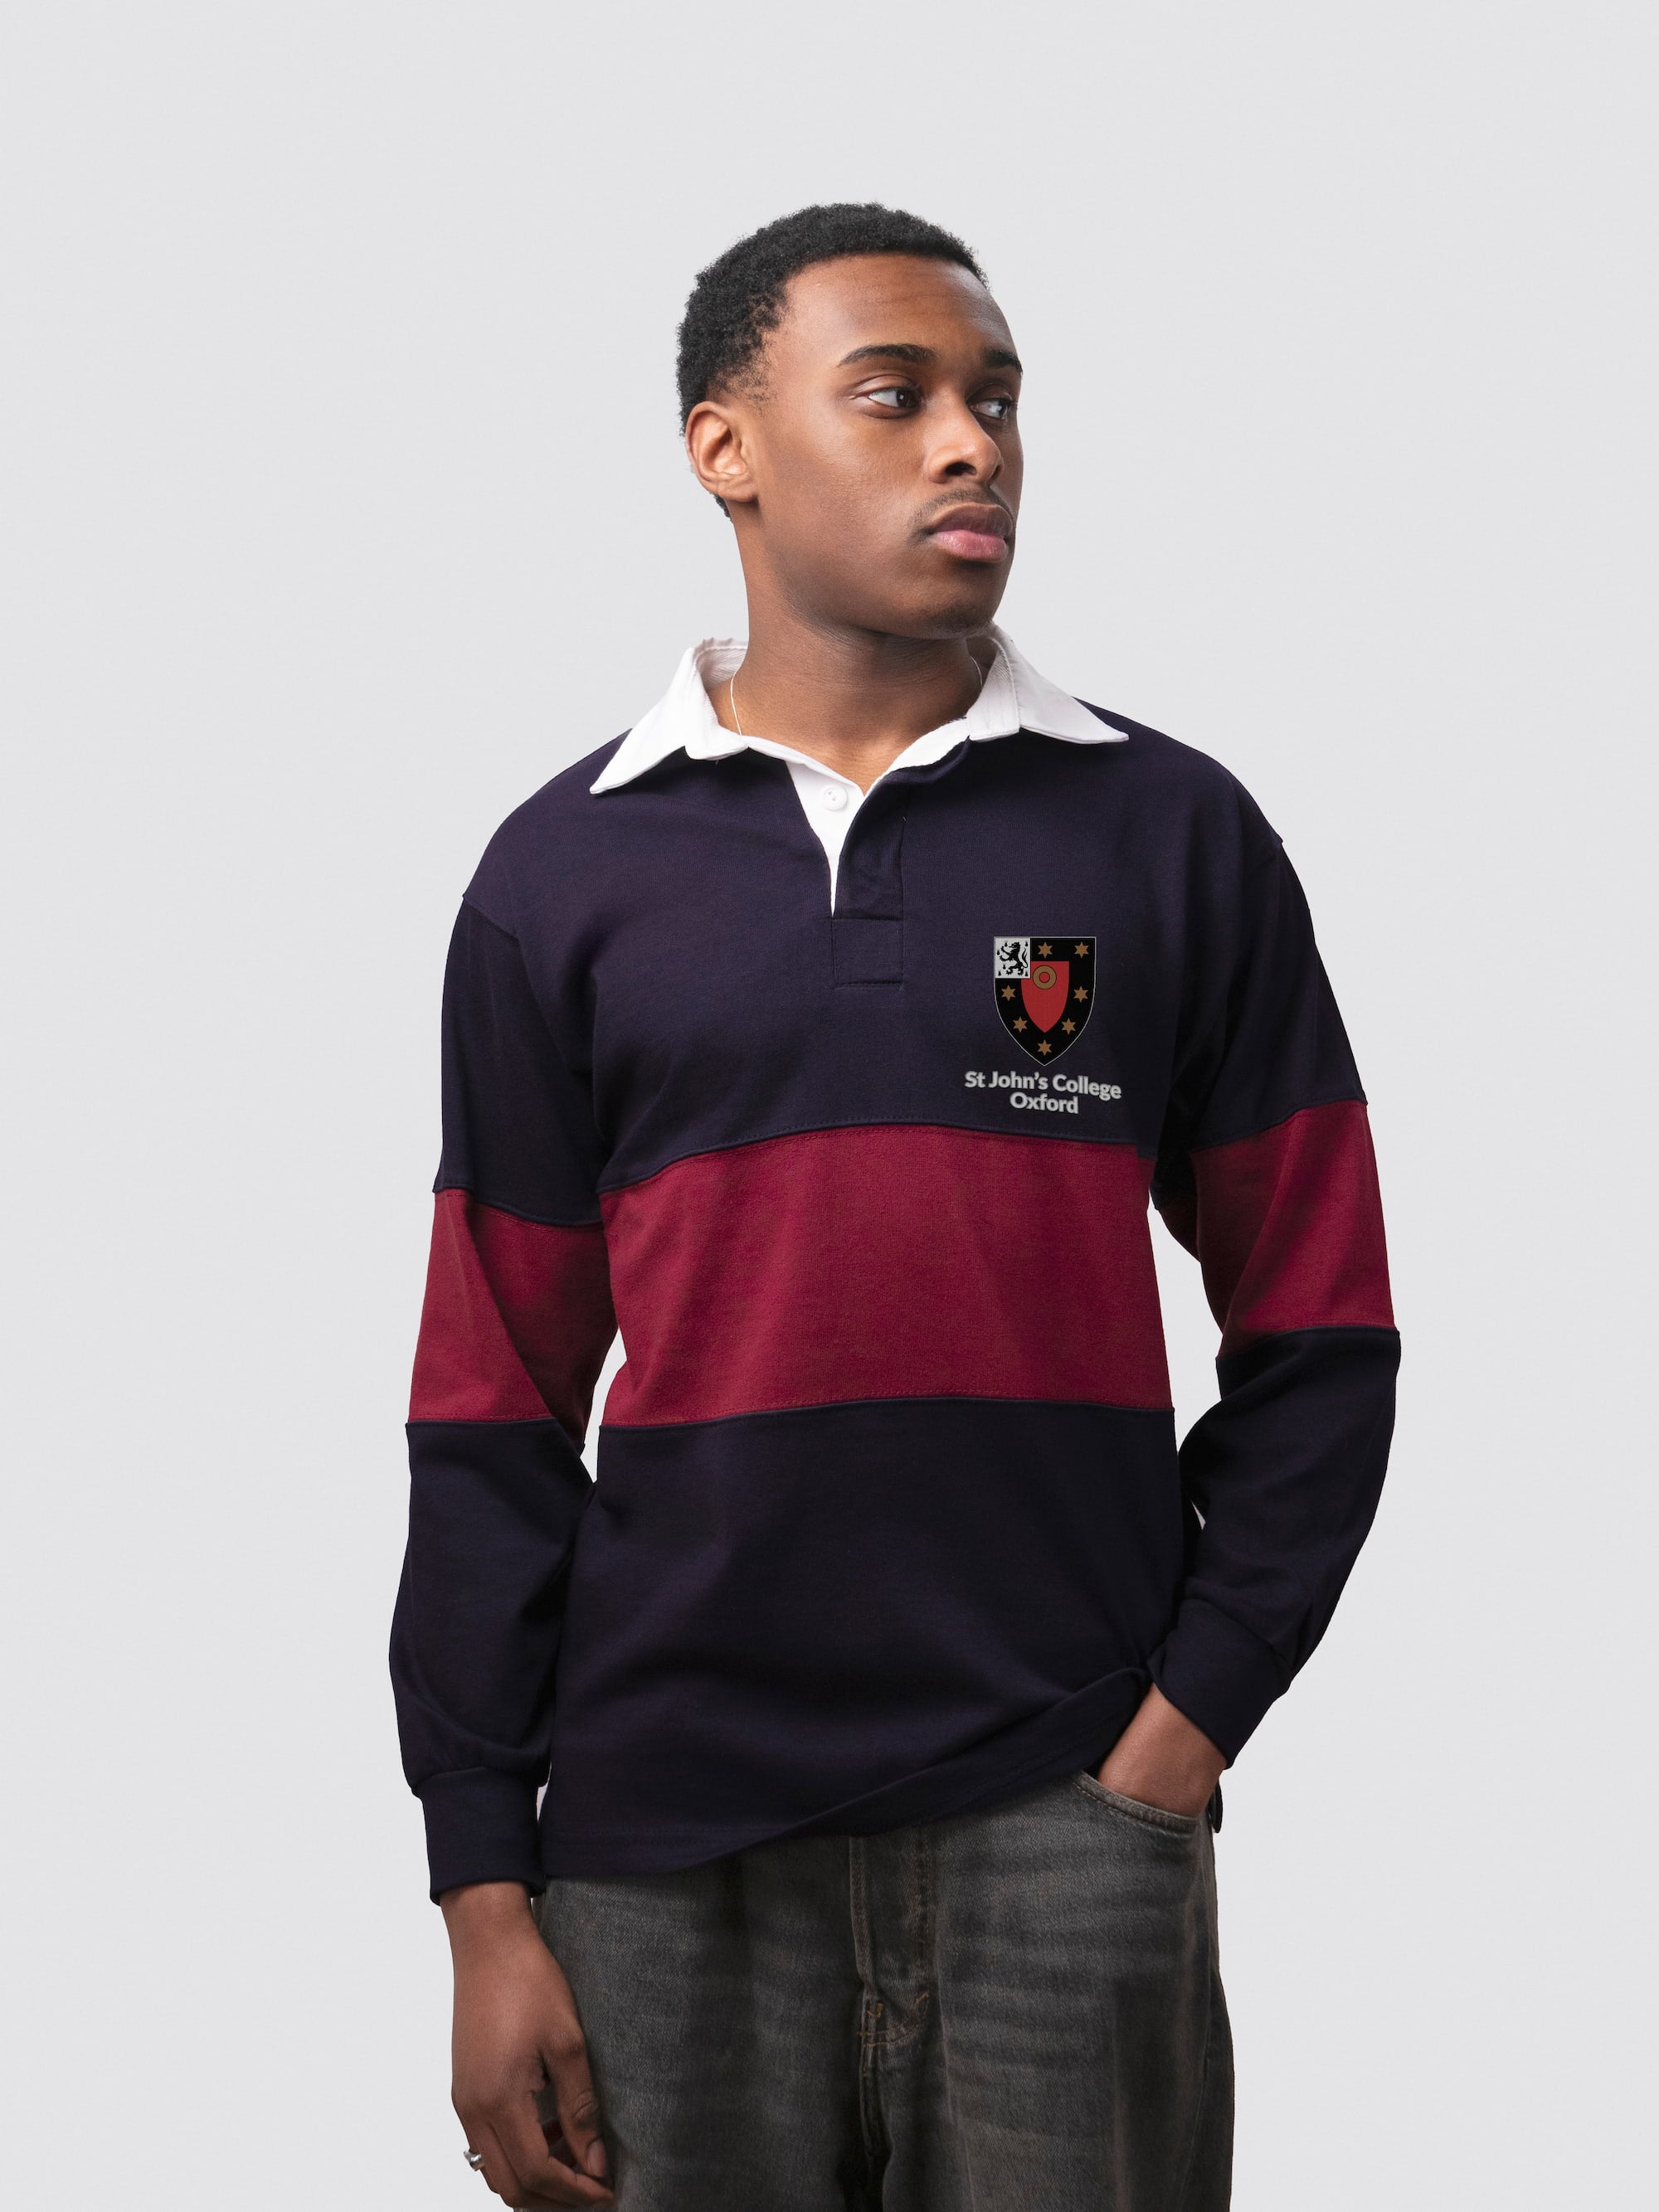 St John's College Oxford JCR Unisex Panelled Rugby Shirt